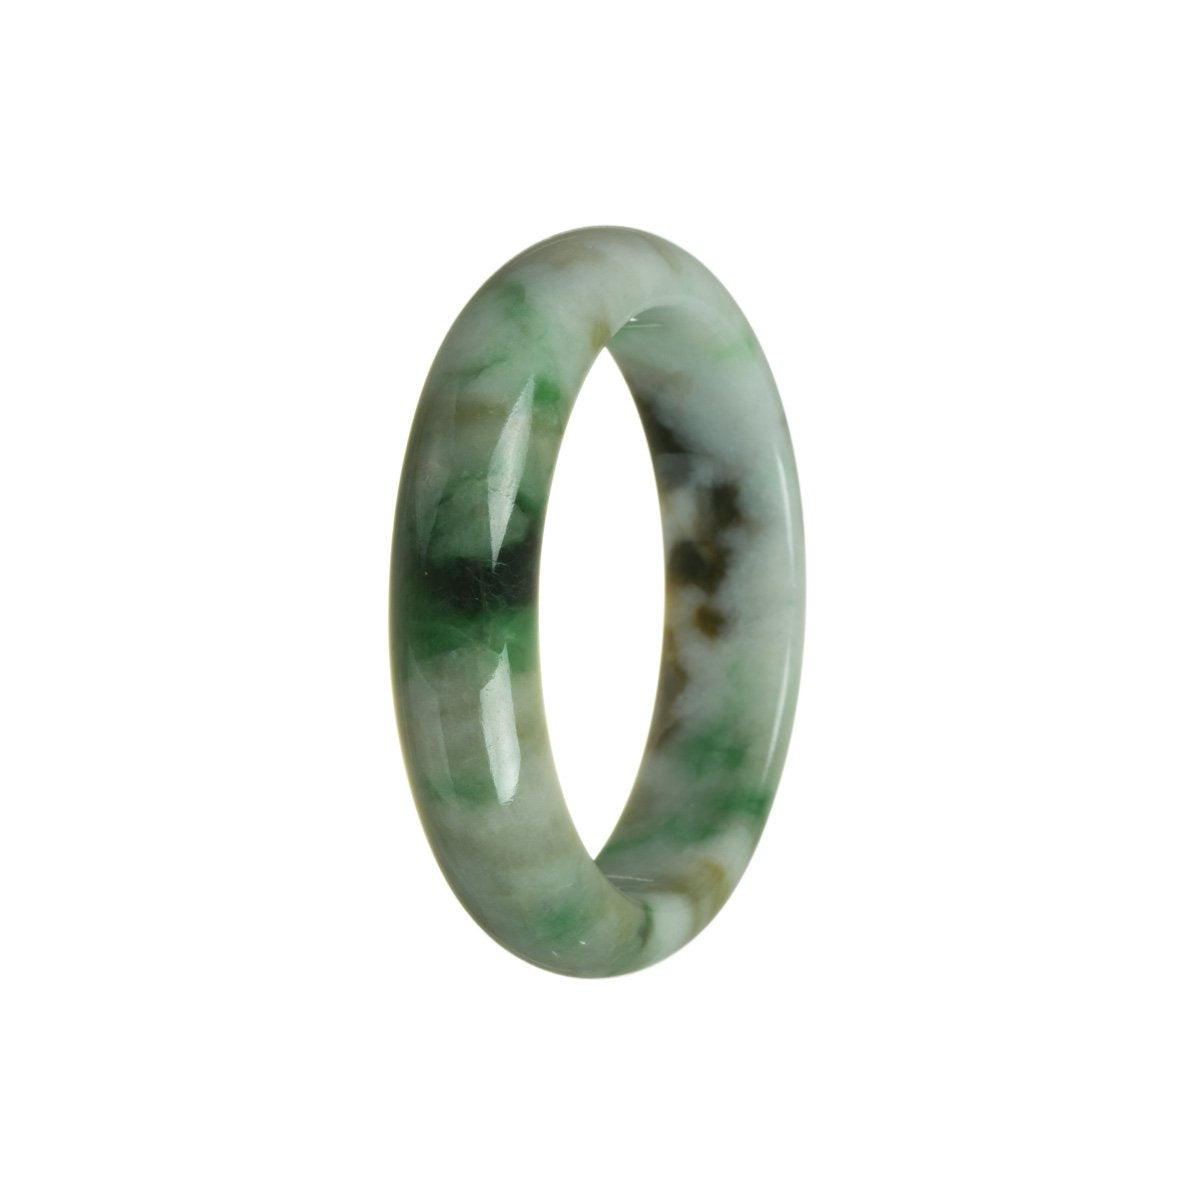 A jade bangle bracelet made of certified Grade A green with brown and white Burma jade. The bracelet has a half moon shape and measures 55mm.